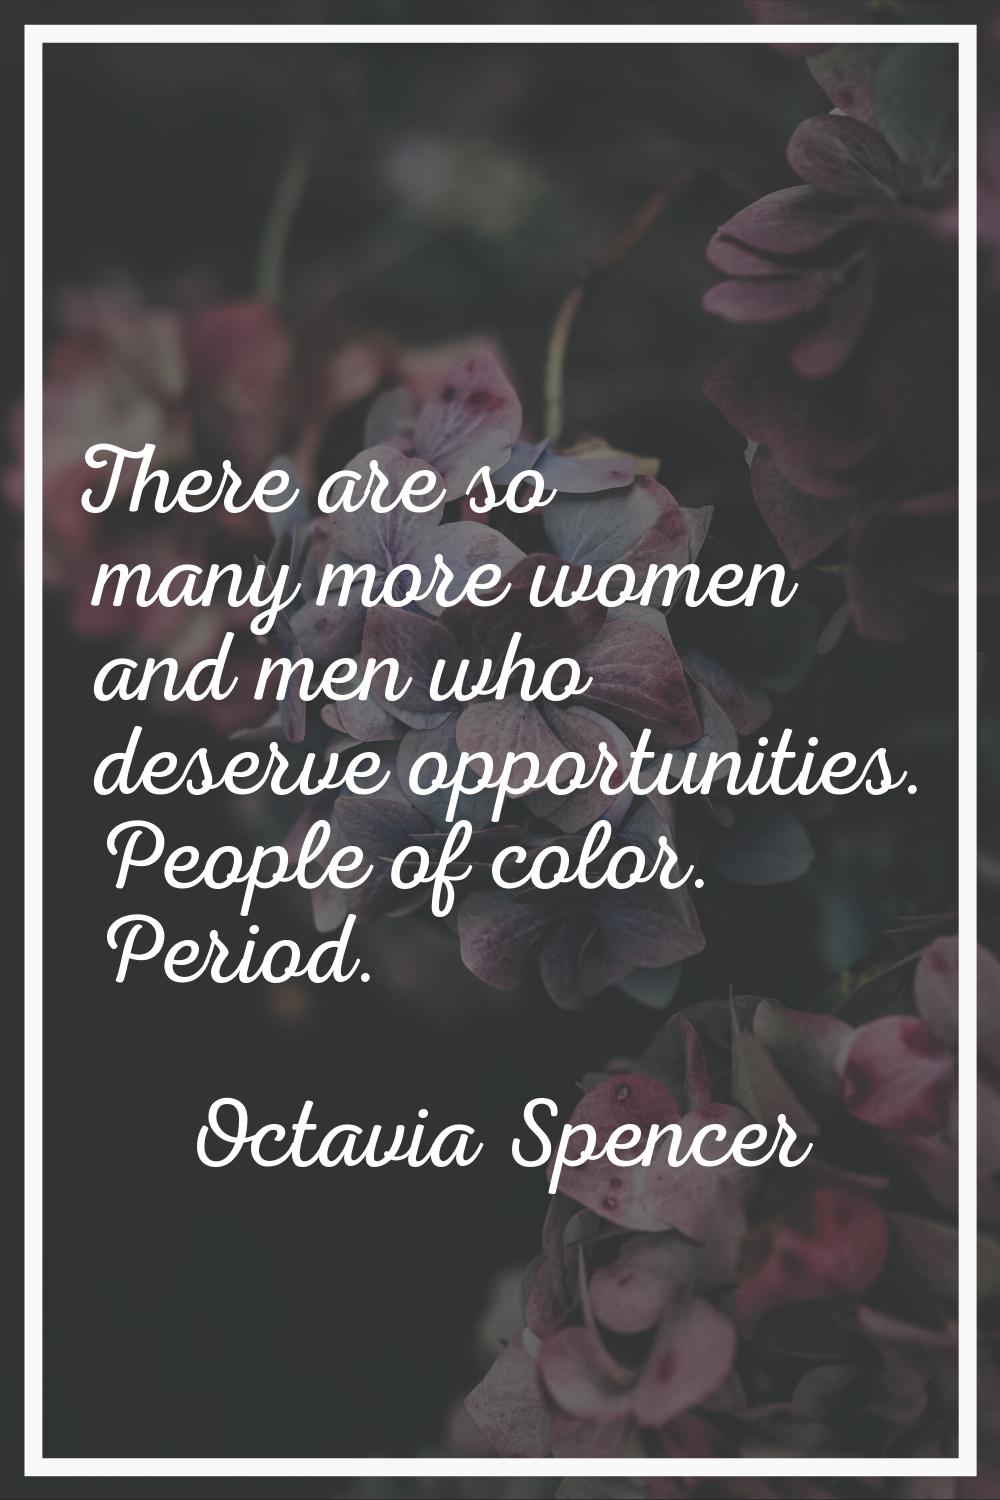 There are so many more women and men who deserve opportunities. People of color. Period.